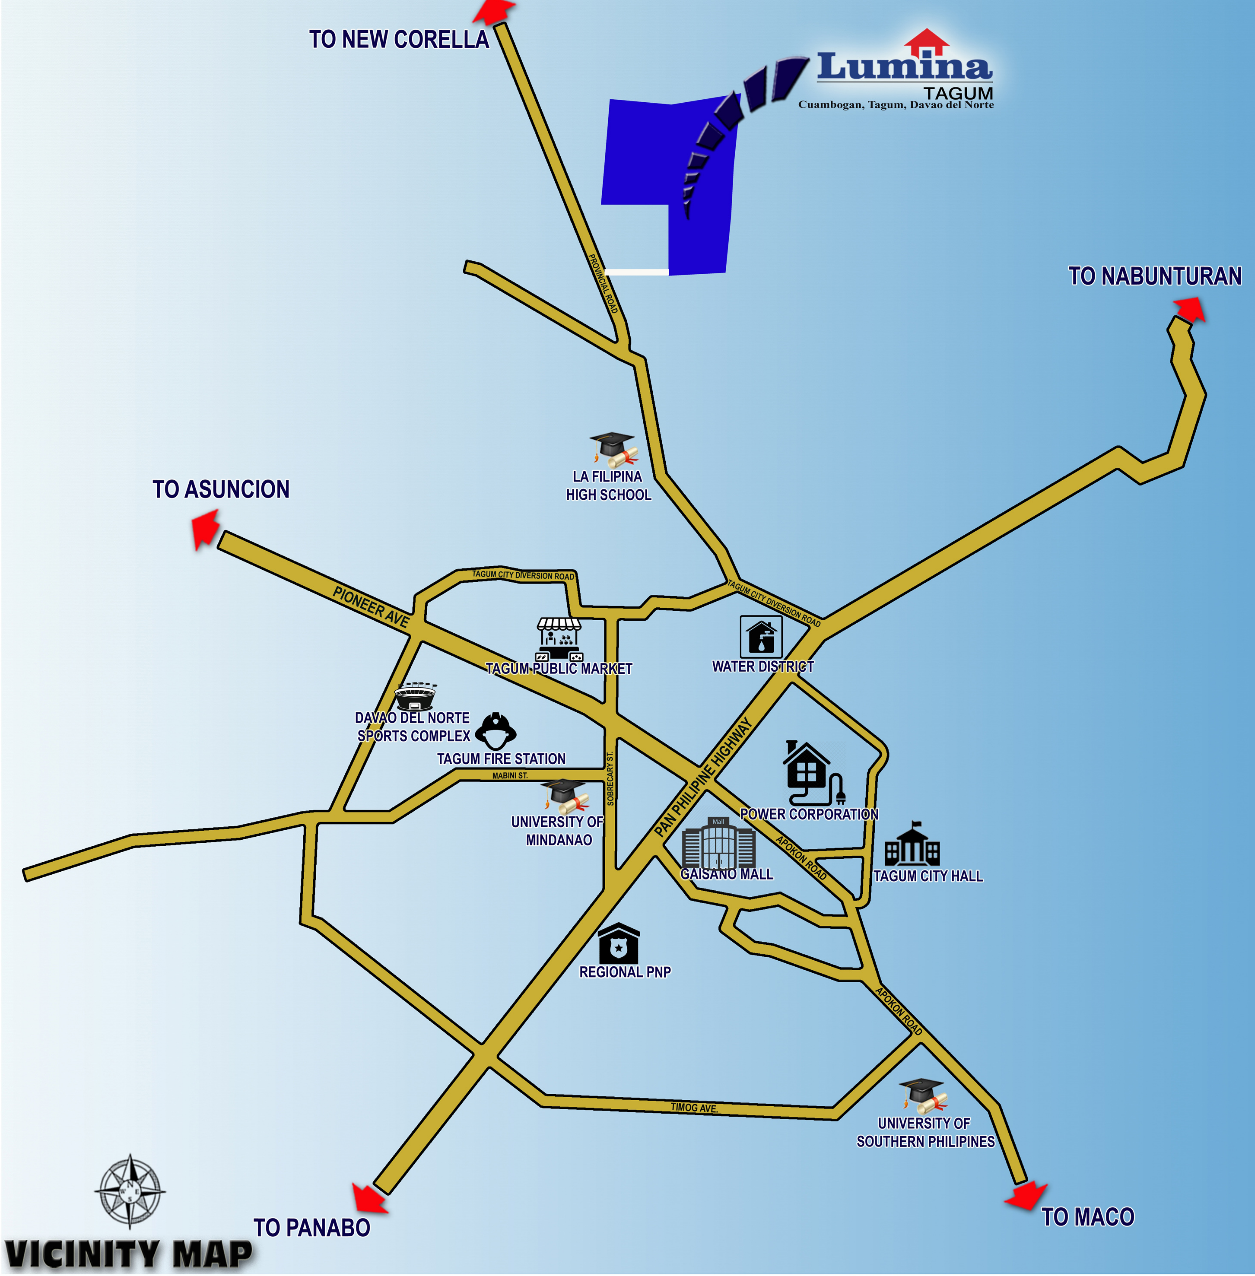 VICINITY-MAP-1642495700.png